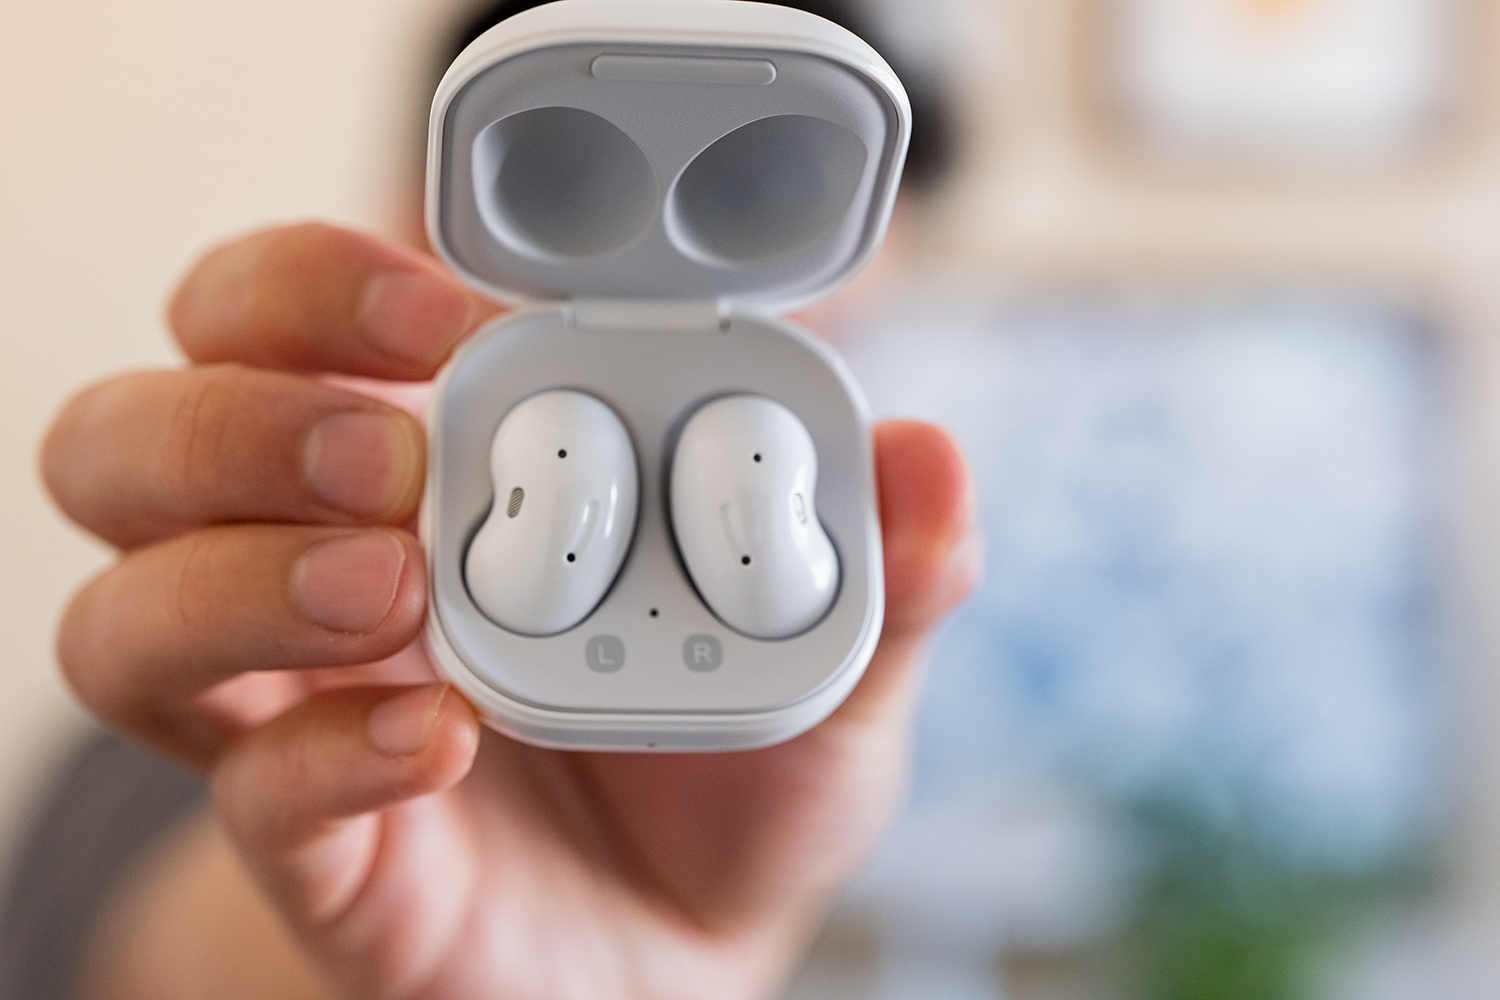 Samsung Galaxy Buds FE Leaks Once Again, Giving Us a Better Look